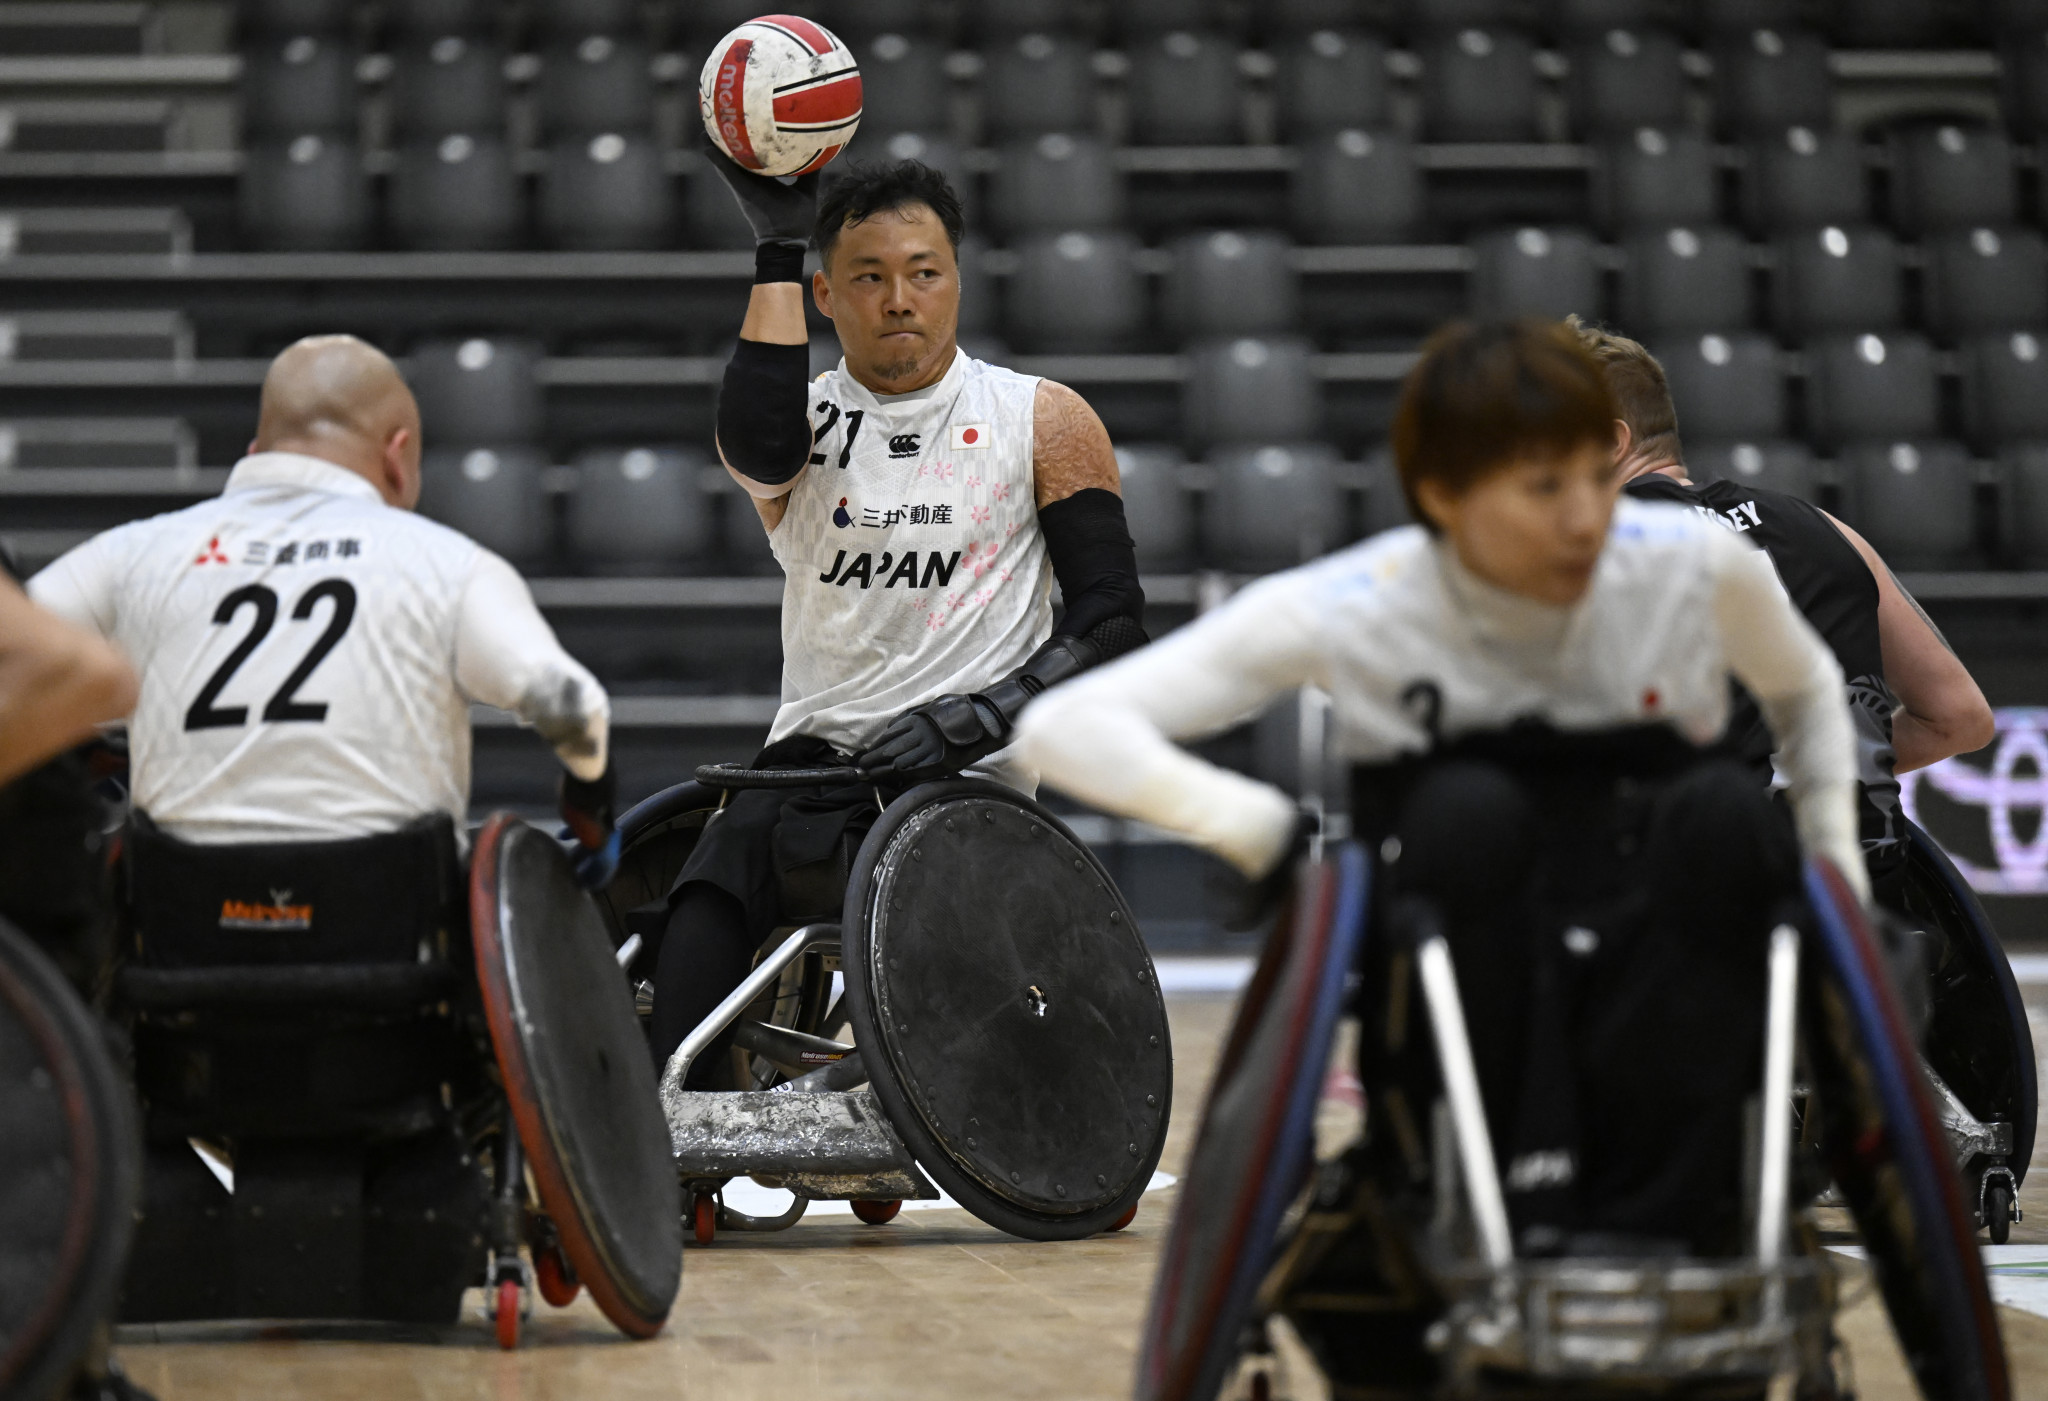 Japan secured their sixth victory of the competition against New Zealand ©Lars Møller/Parasport Denmark